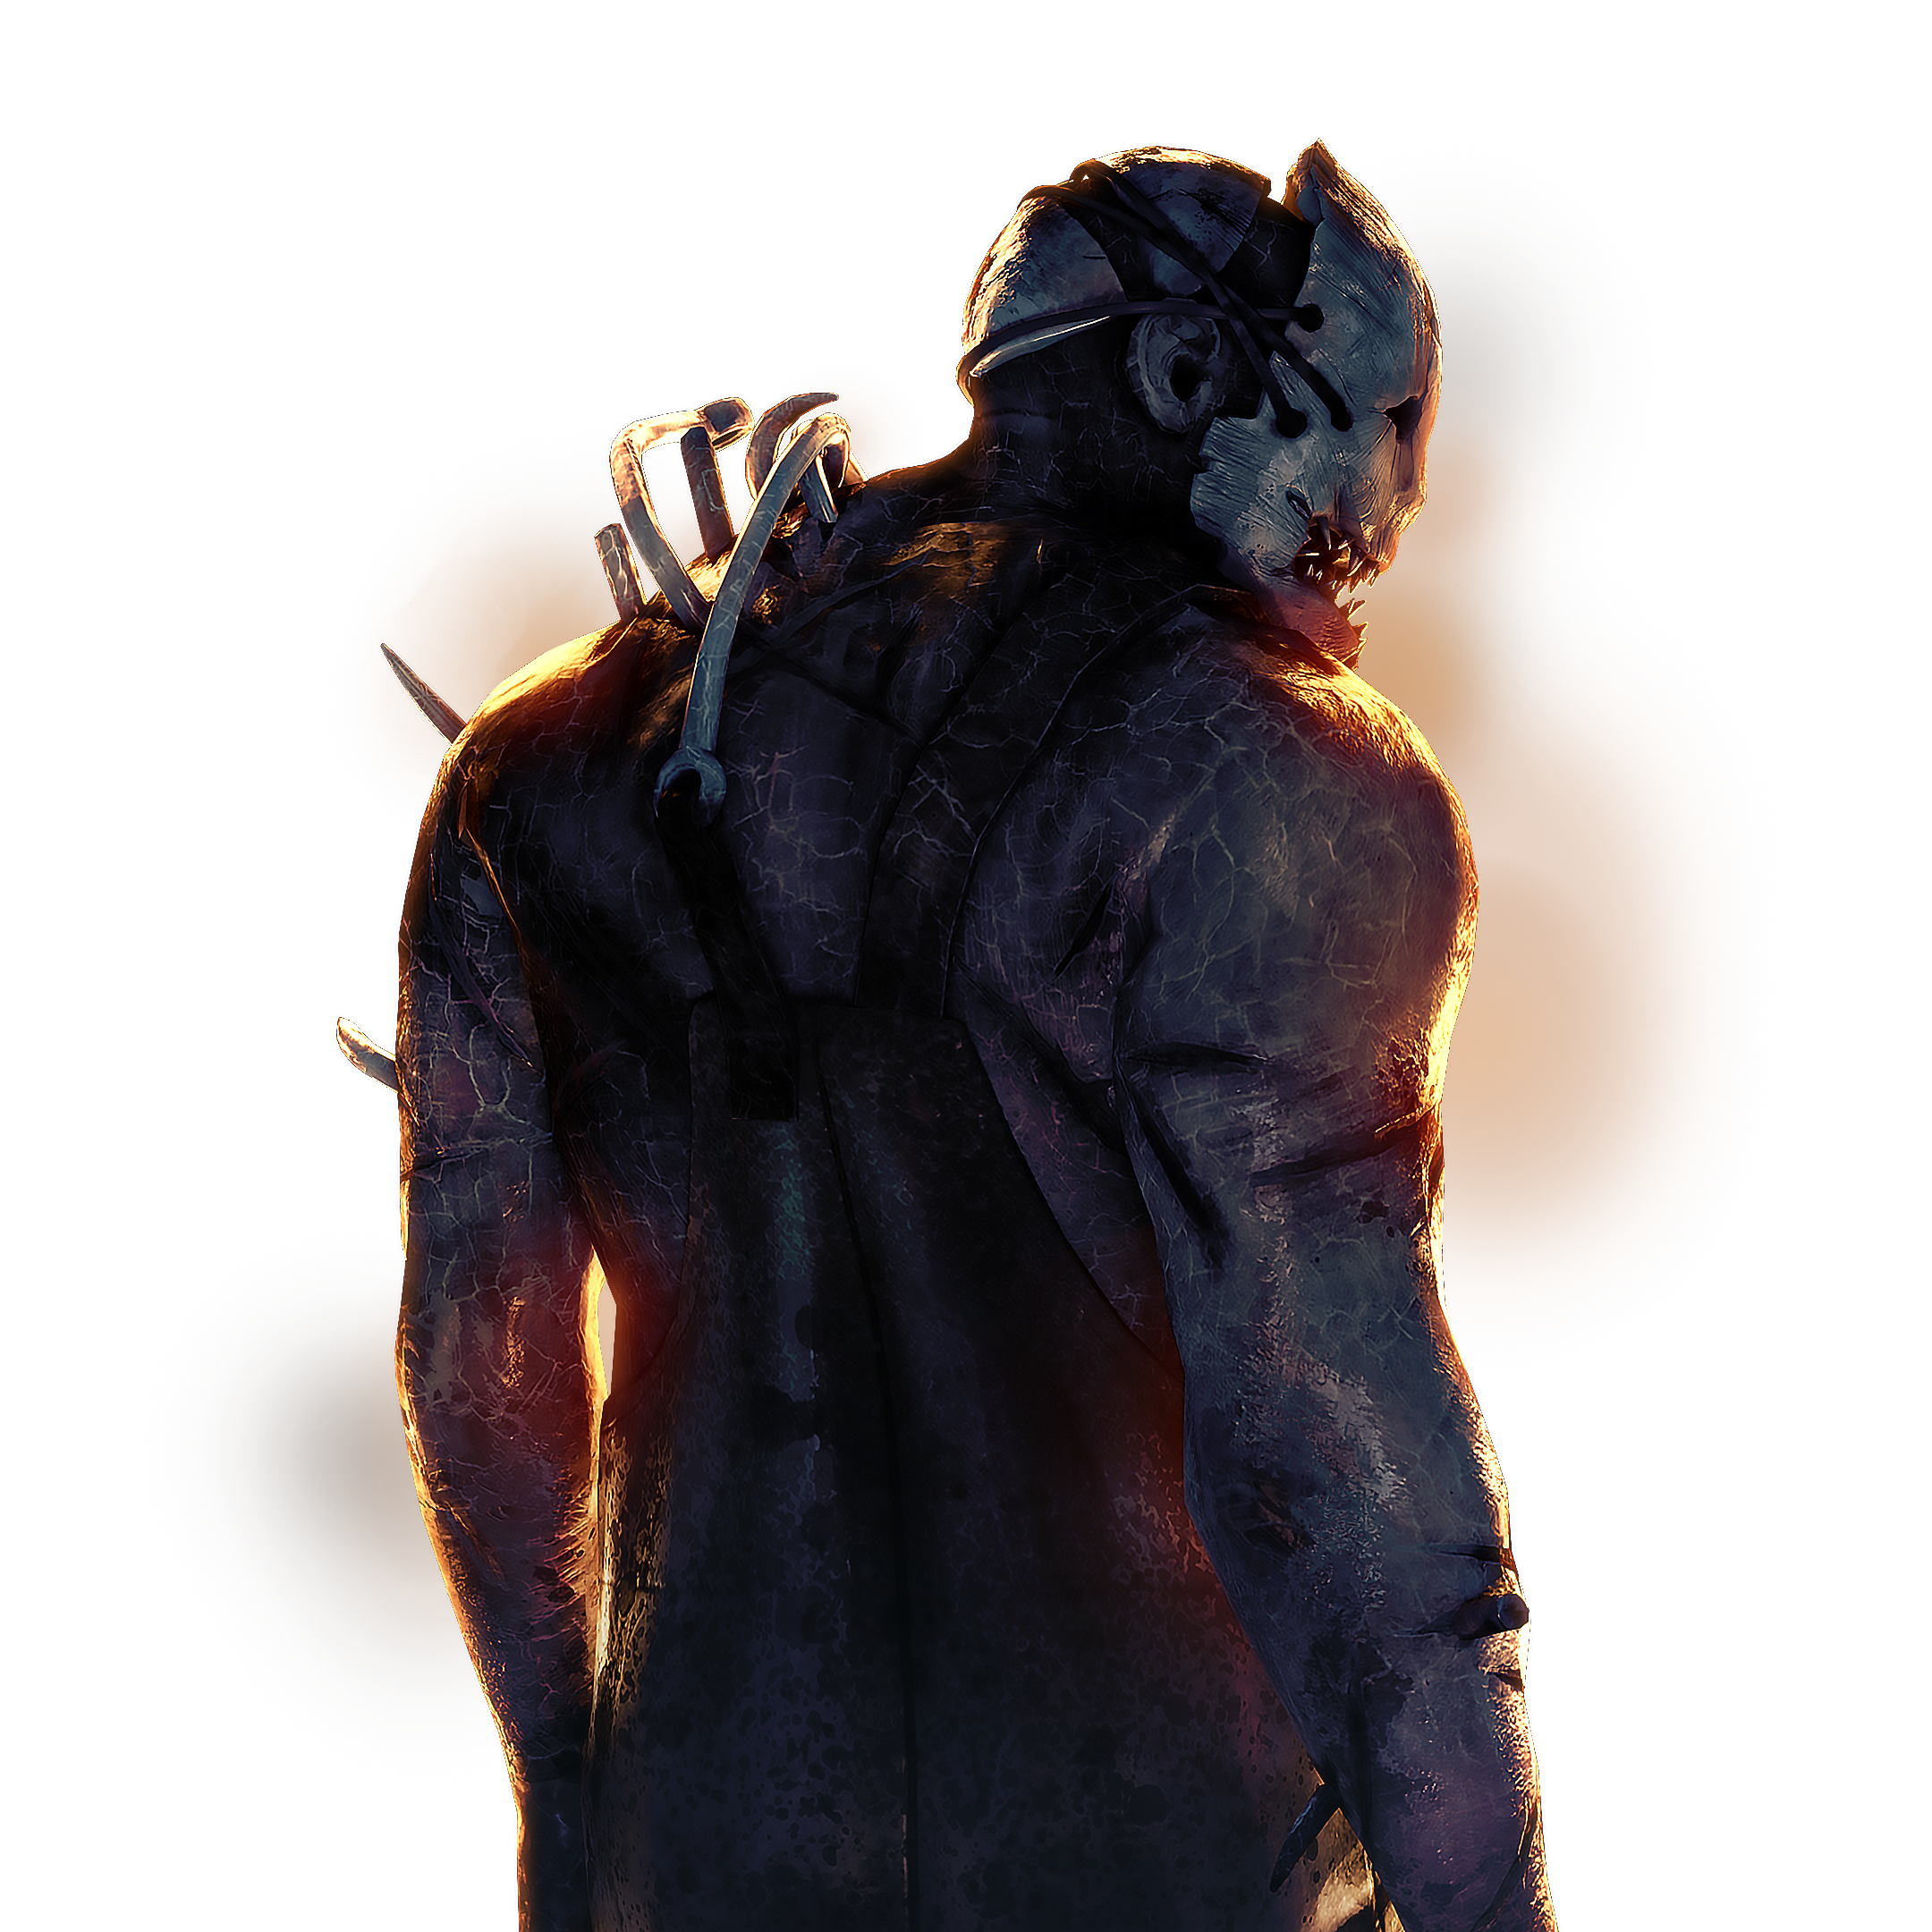 In-Game Store - Official Dead by Daylight Wiki